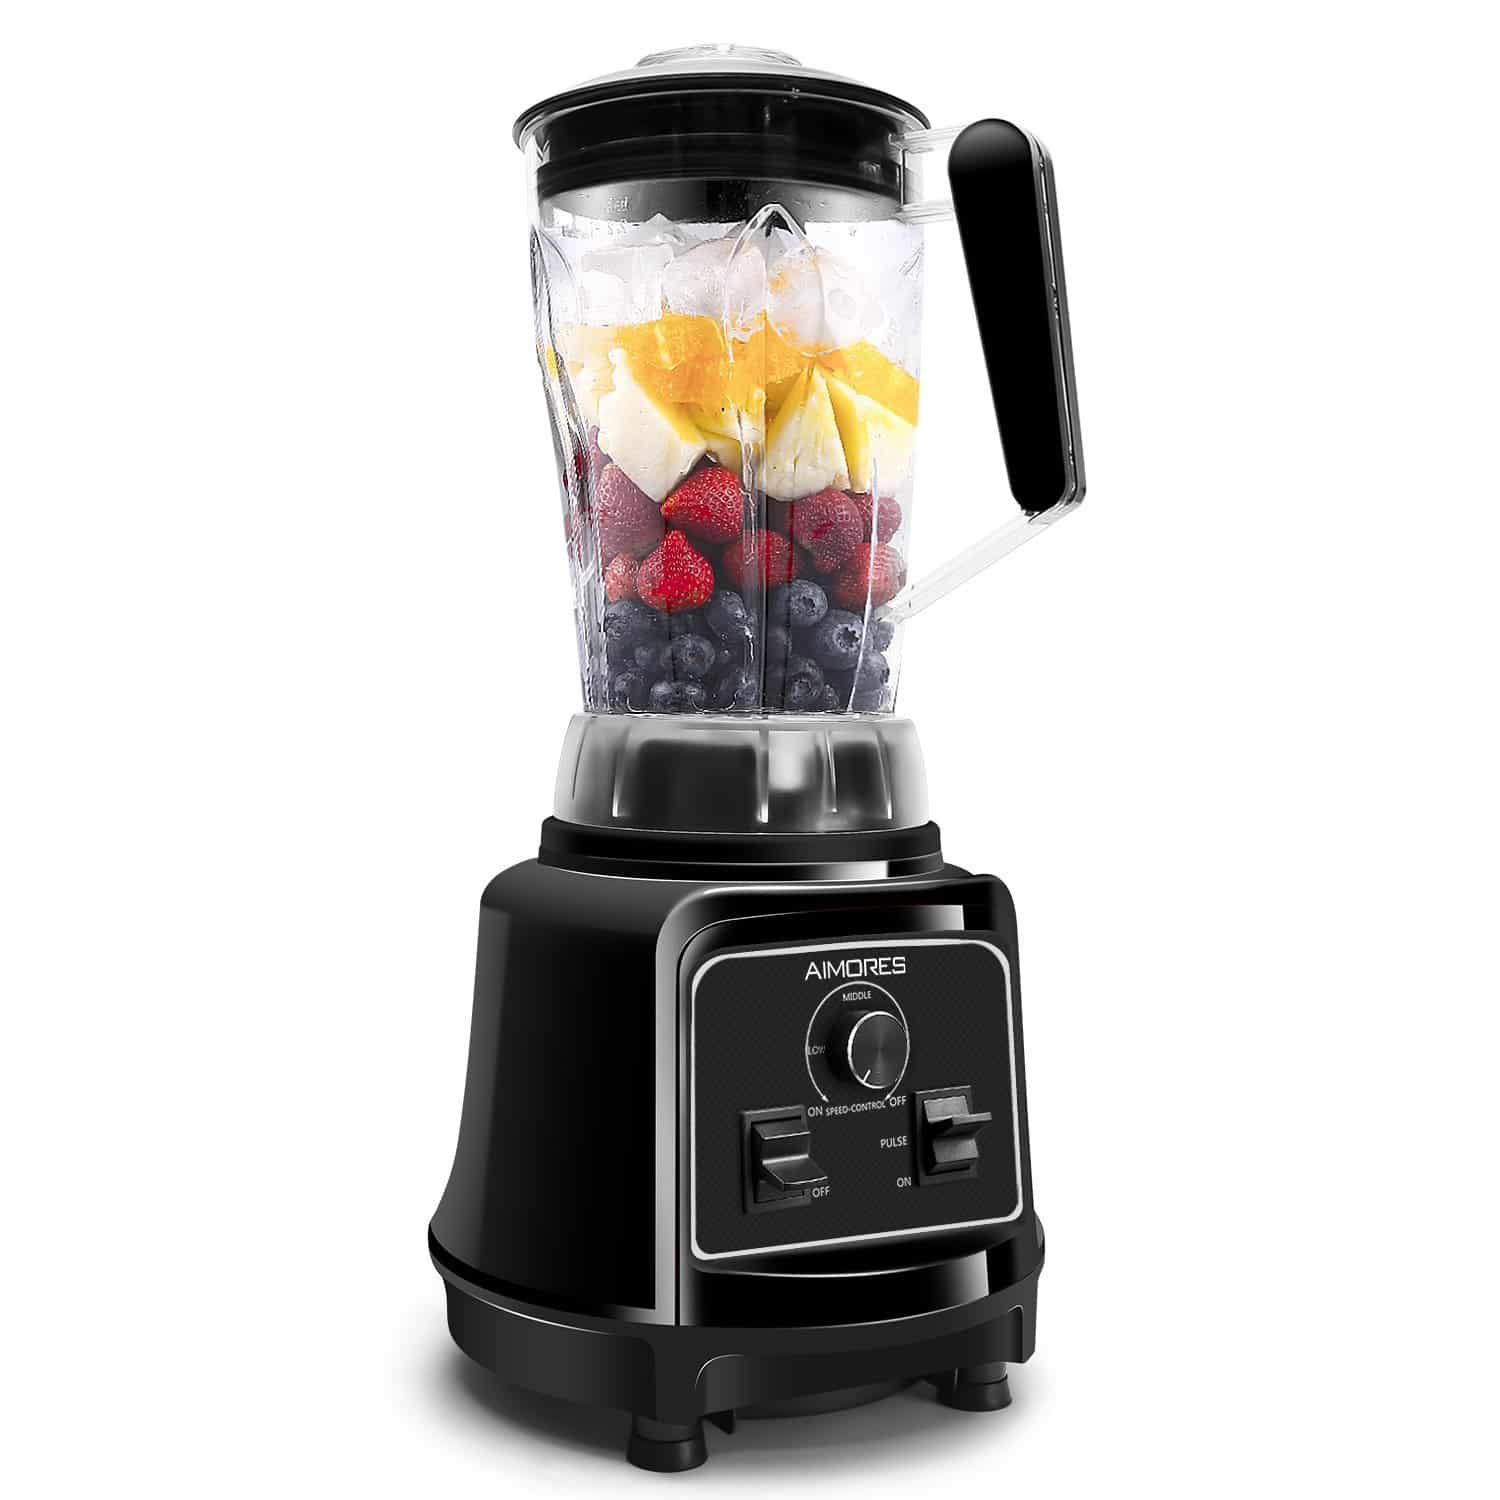 Best Blender For Smoothies / What